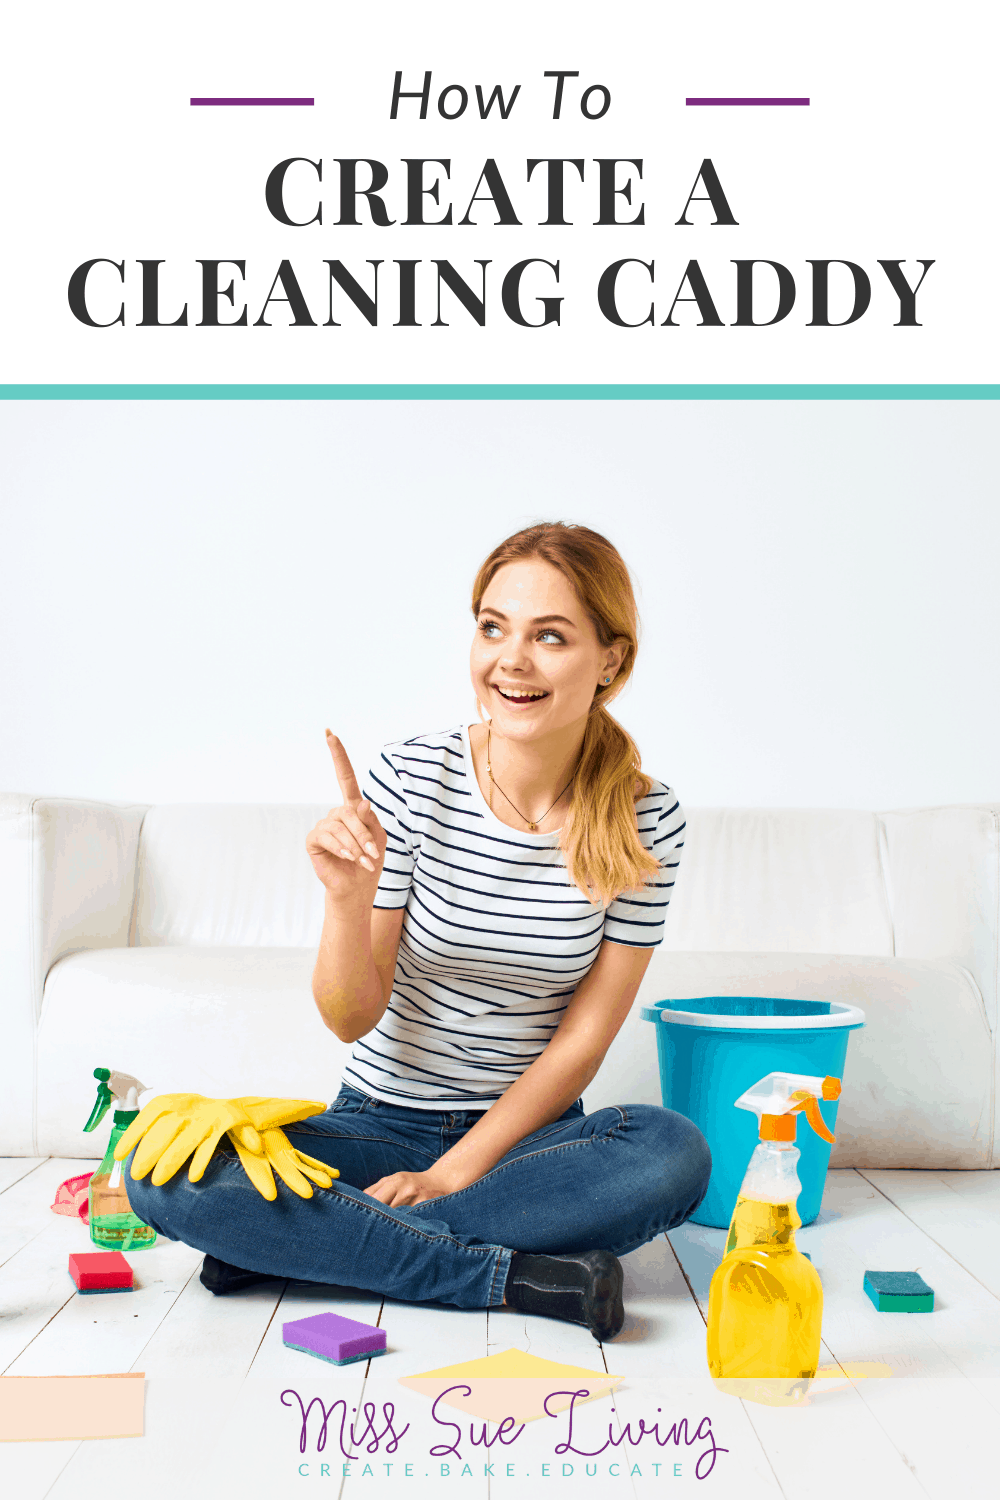 https://misssueliving.com/wp-content/uploads/2021/04/how-to-create-a-cleaning-caddy-pin-image.png